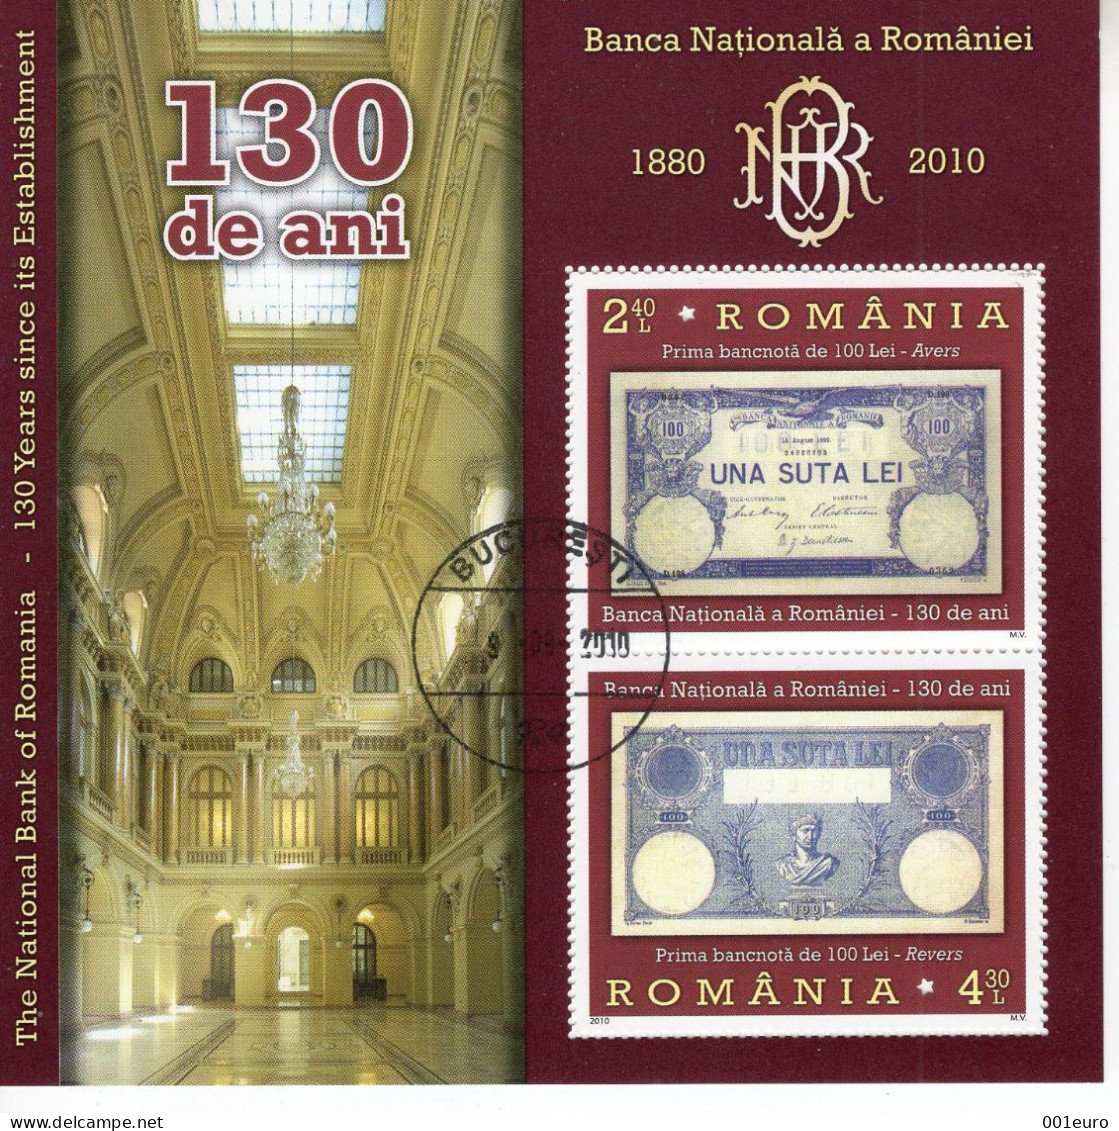 ROMANIA 2010 : ROMANIAN NATIONAL BANK130 YEARS - BANKNOTE, Used Souvenir Block - Registered Shipping! - Gebraucht